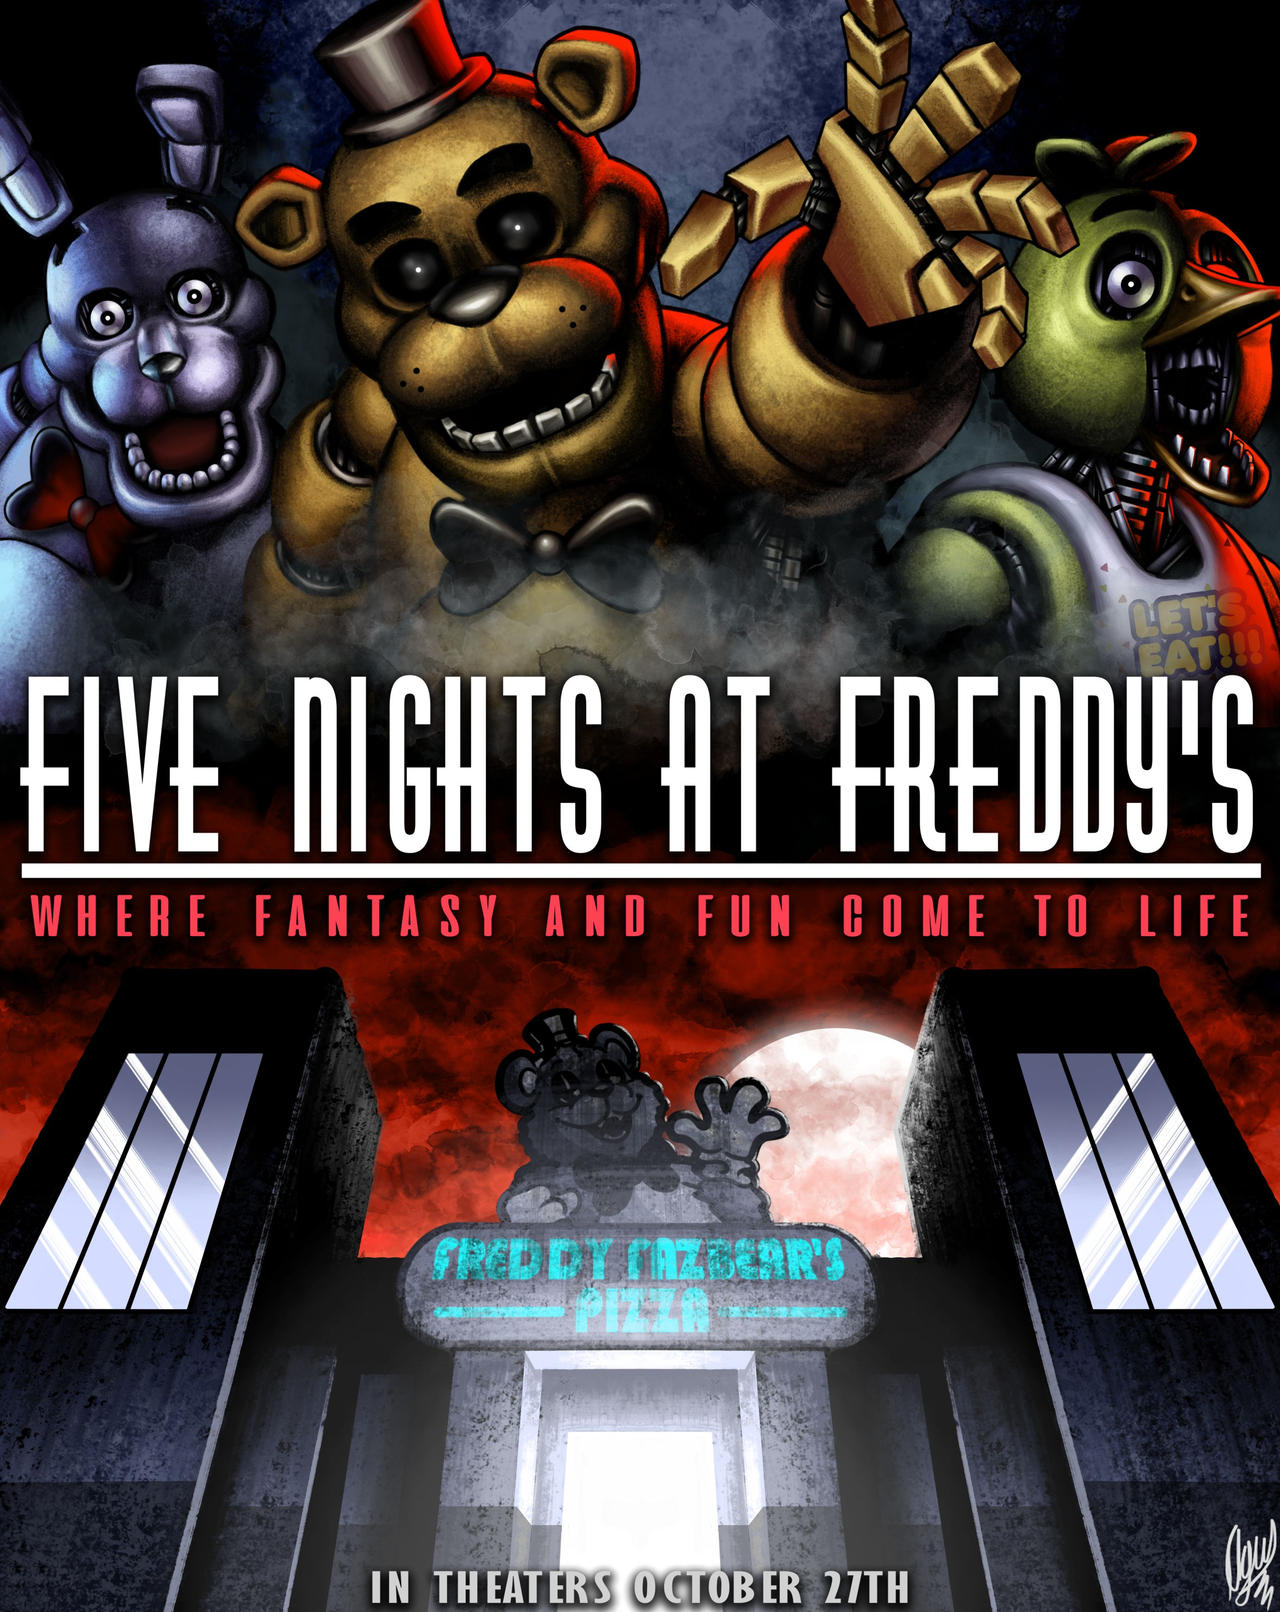 My artwork of Freddy Fazbear from hit game Five Nights at Freddy's